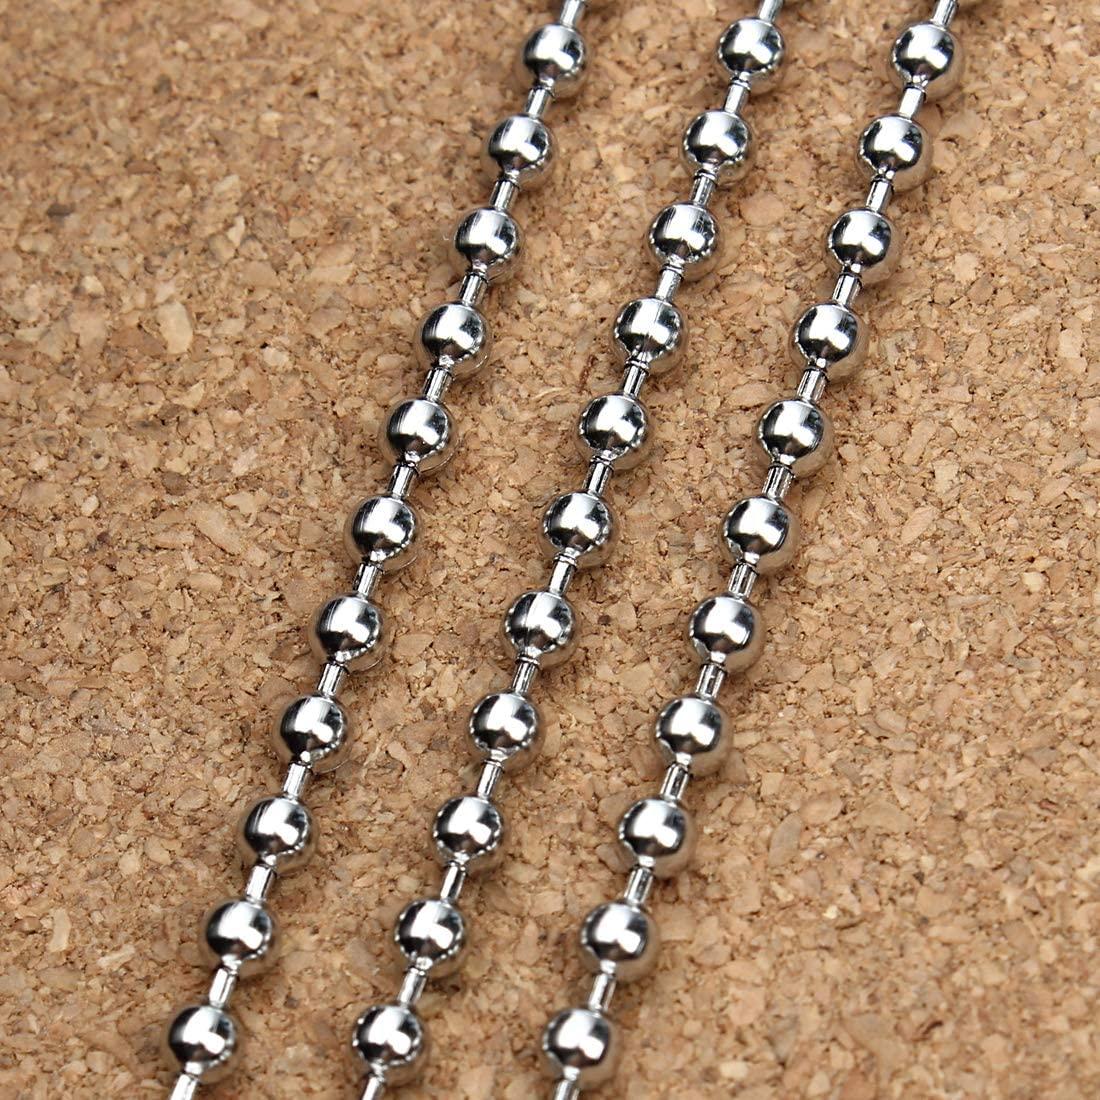 Stainless Steel Ball Chains Necklaces  Stainless Steel Jewelry Making -  1.2-3mm - Aliexpress